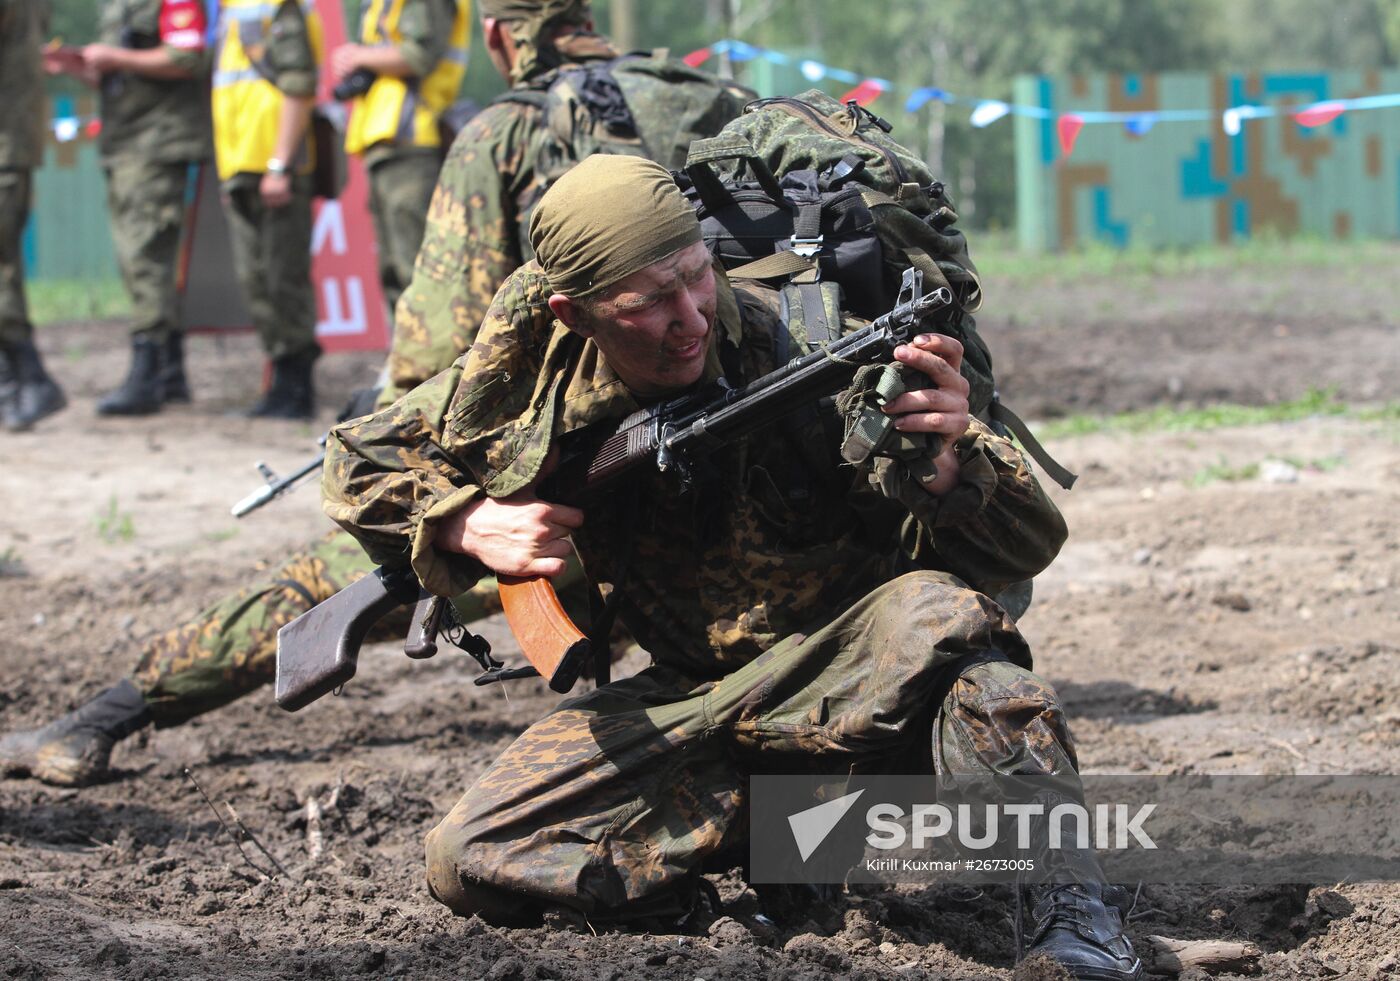 Masters of Reconnaissance Competition in Novosibirsk